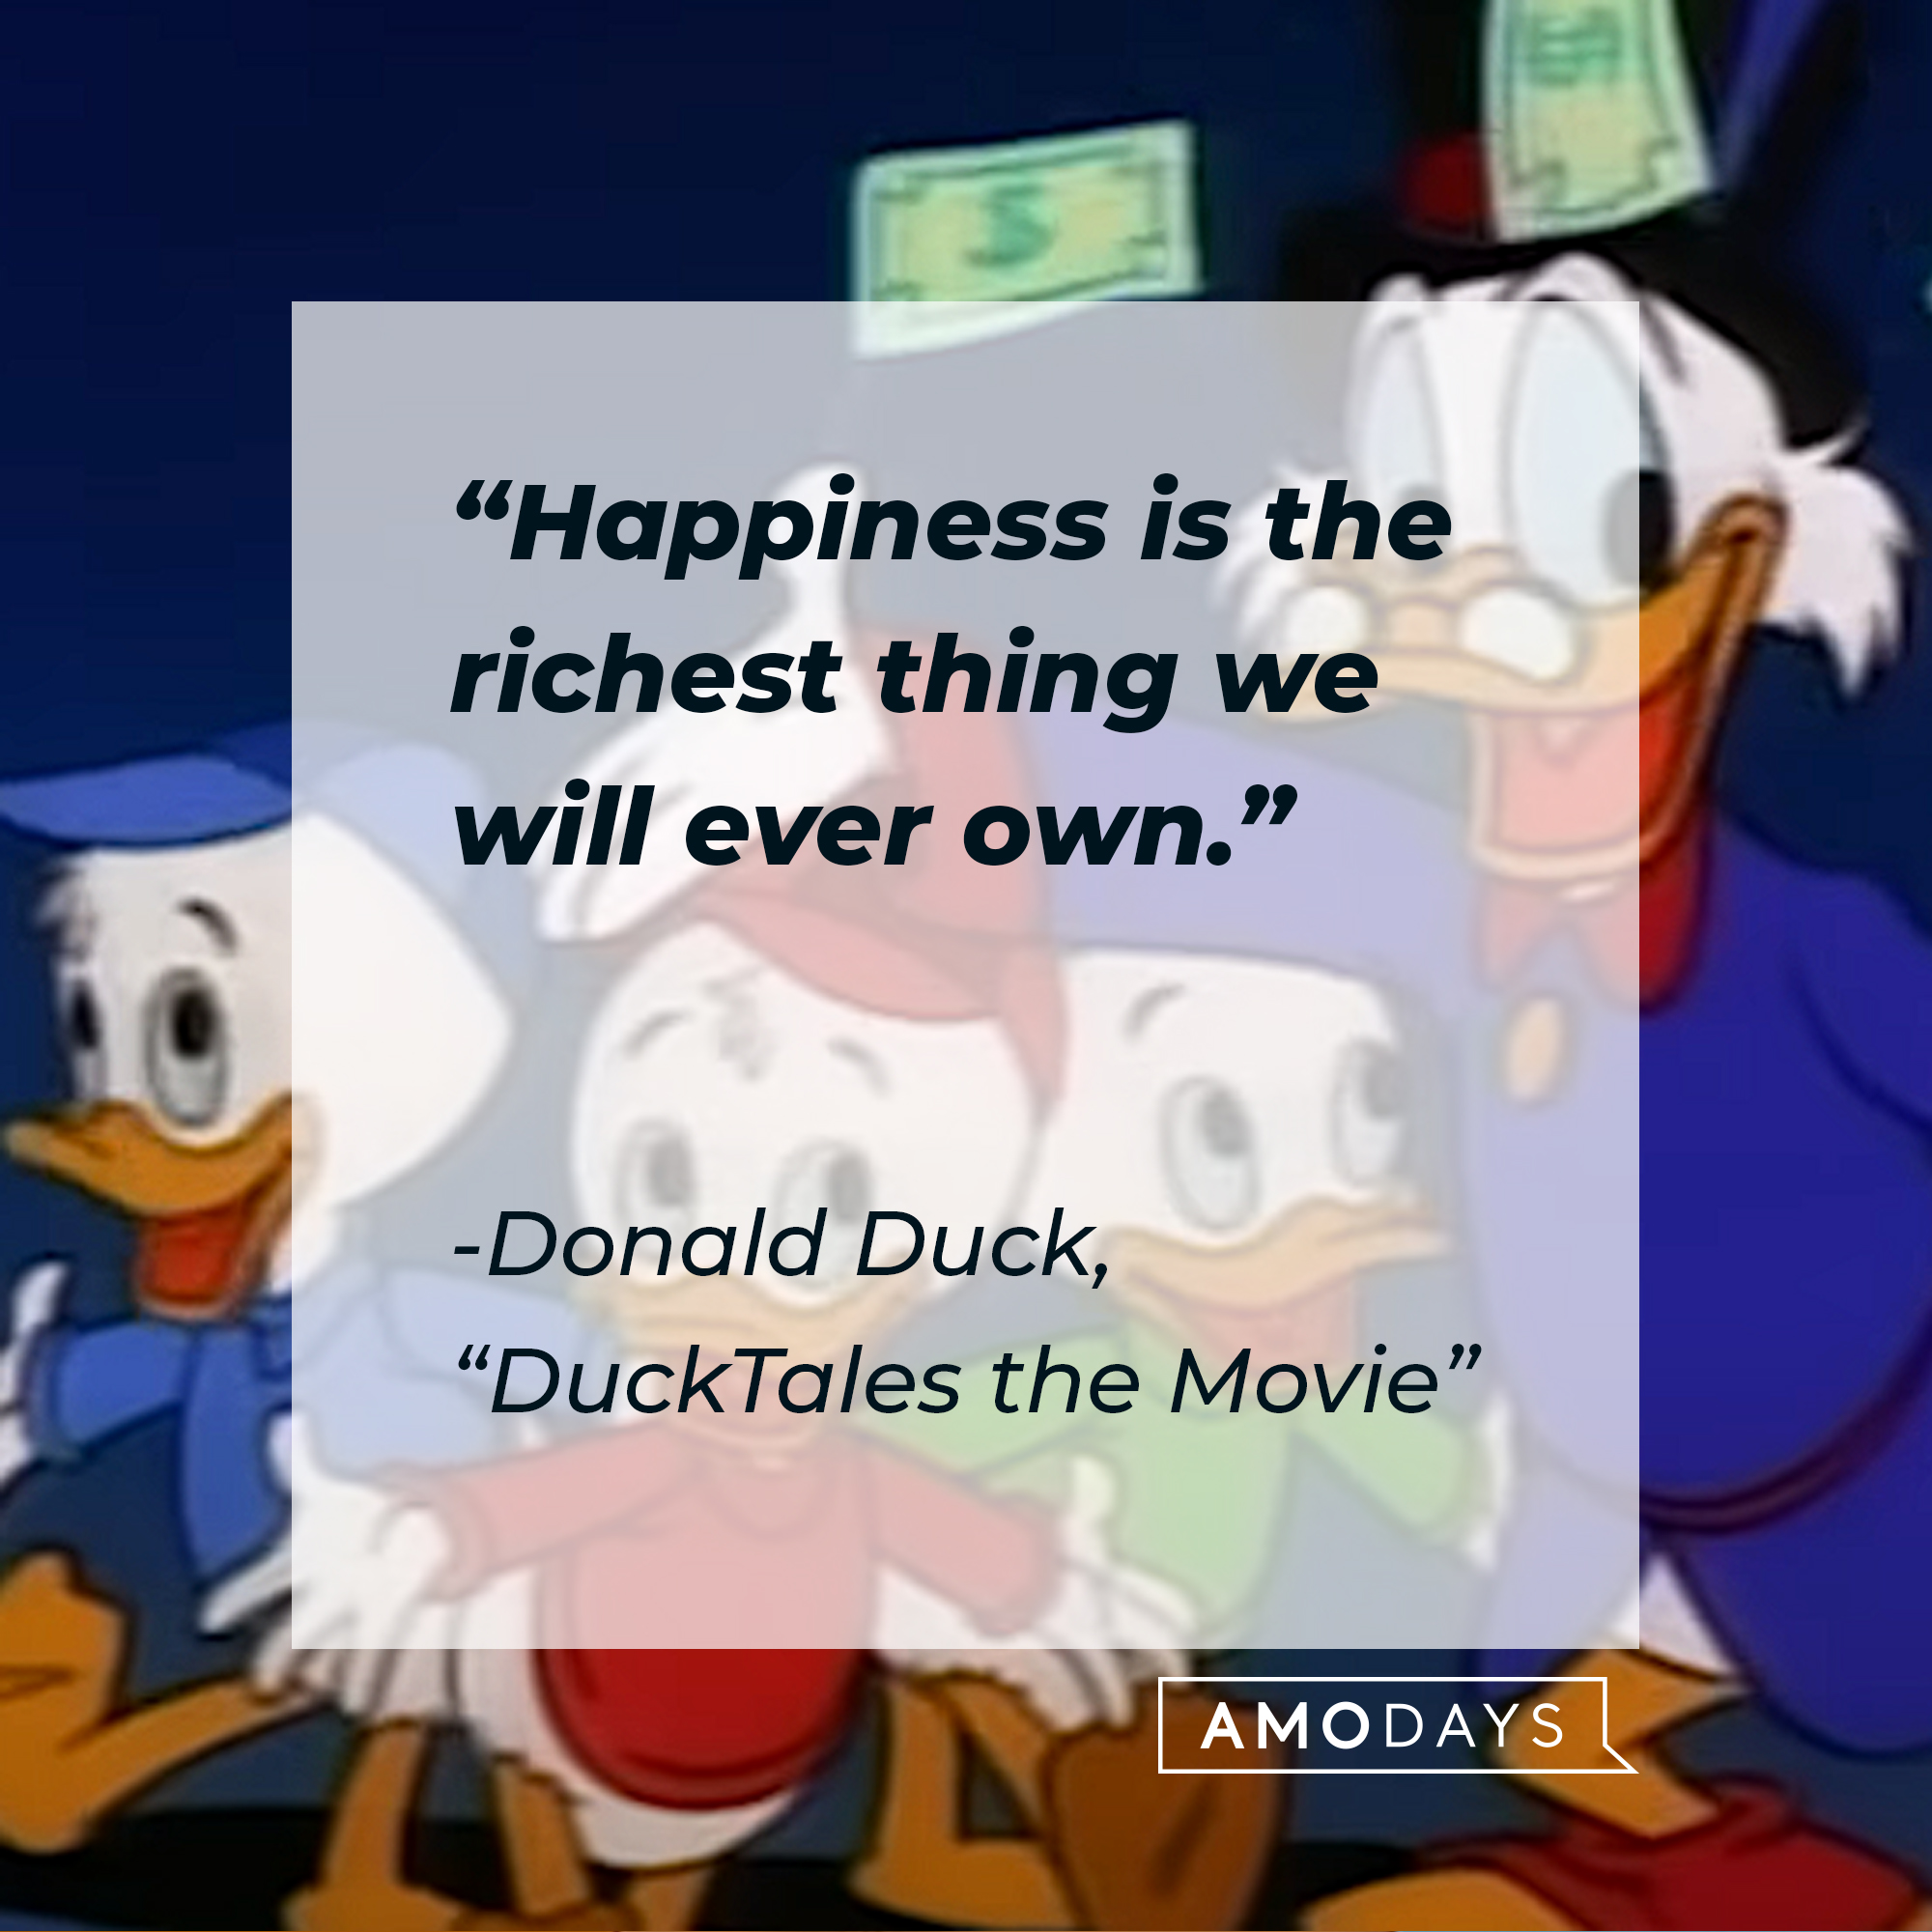 Donald Duck's "DuckTales the Movie" quote: "Happiness is the richest thing we will ever own." | Source: Youtube.com/disneyplus